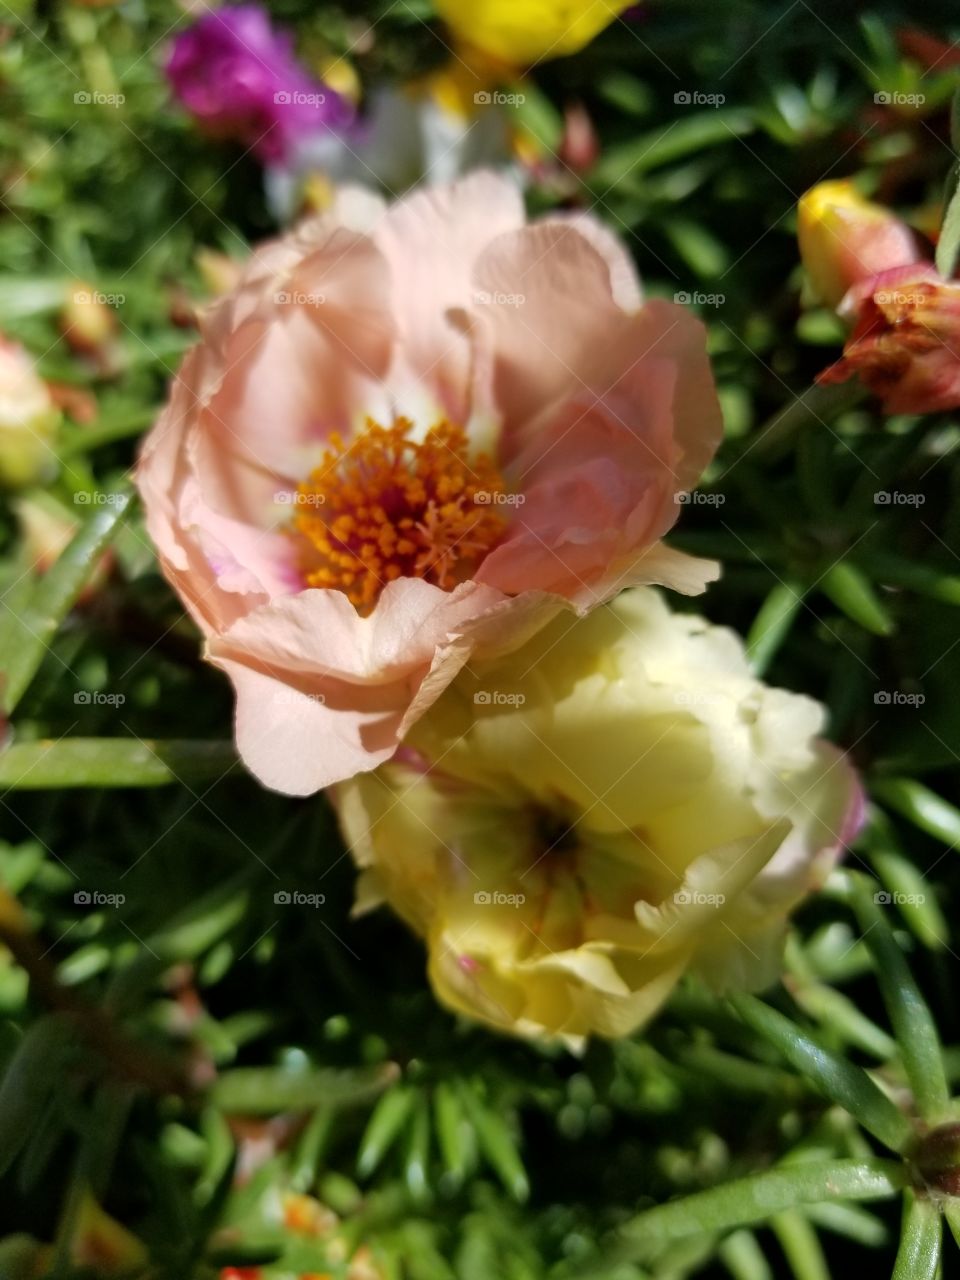 peach and yellow flowers